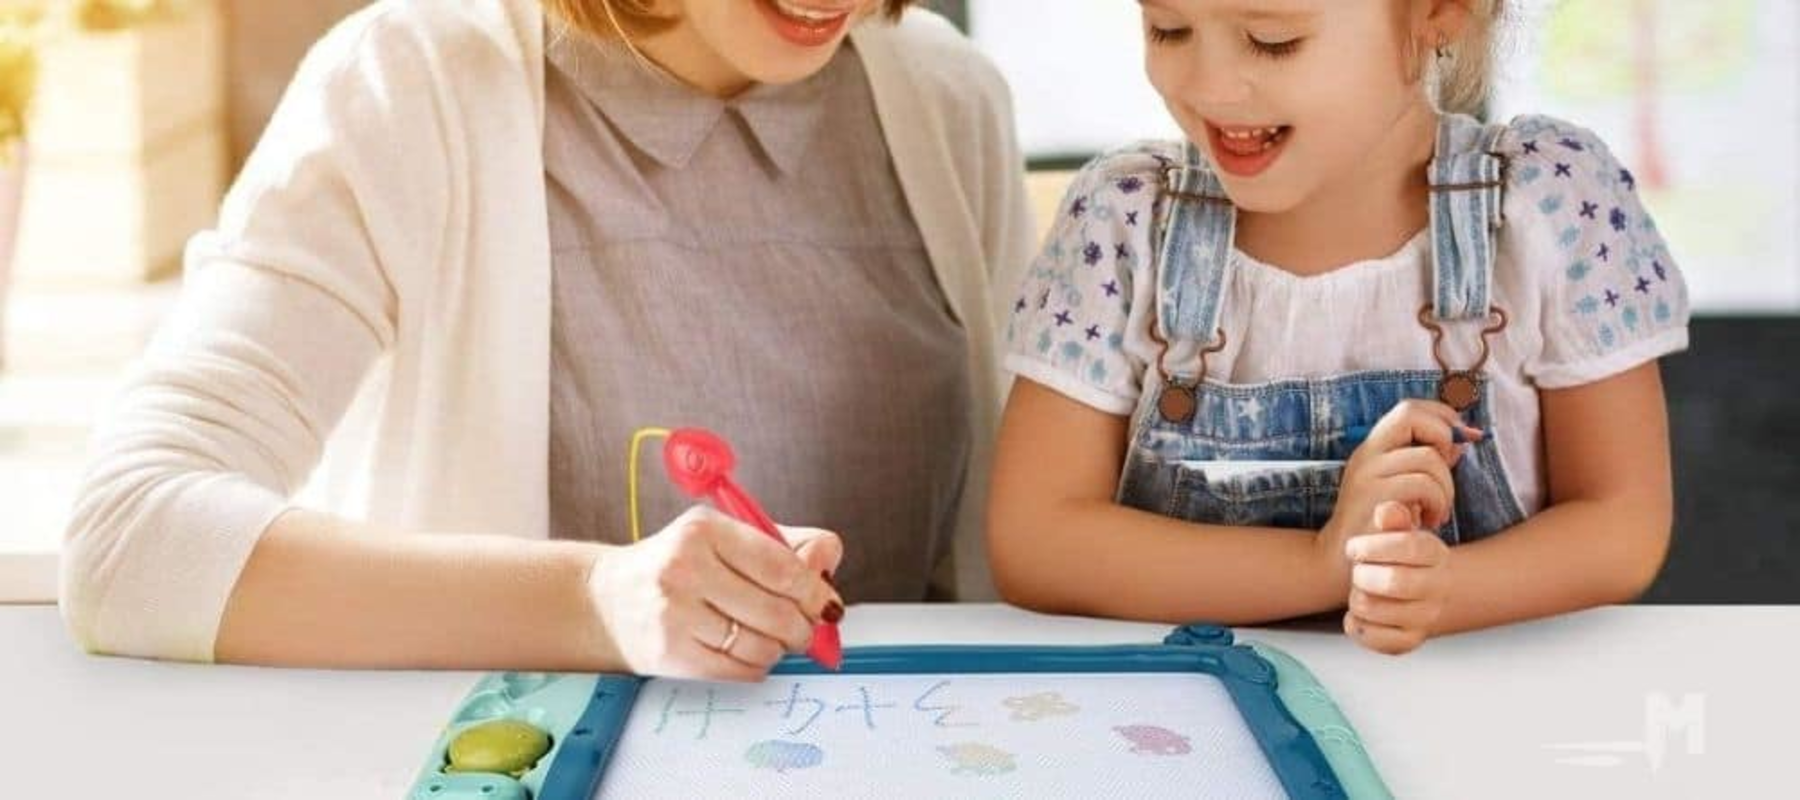 Top 5 drawing tablets for for kids